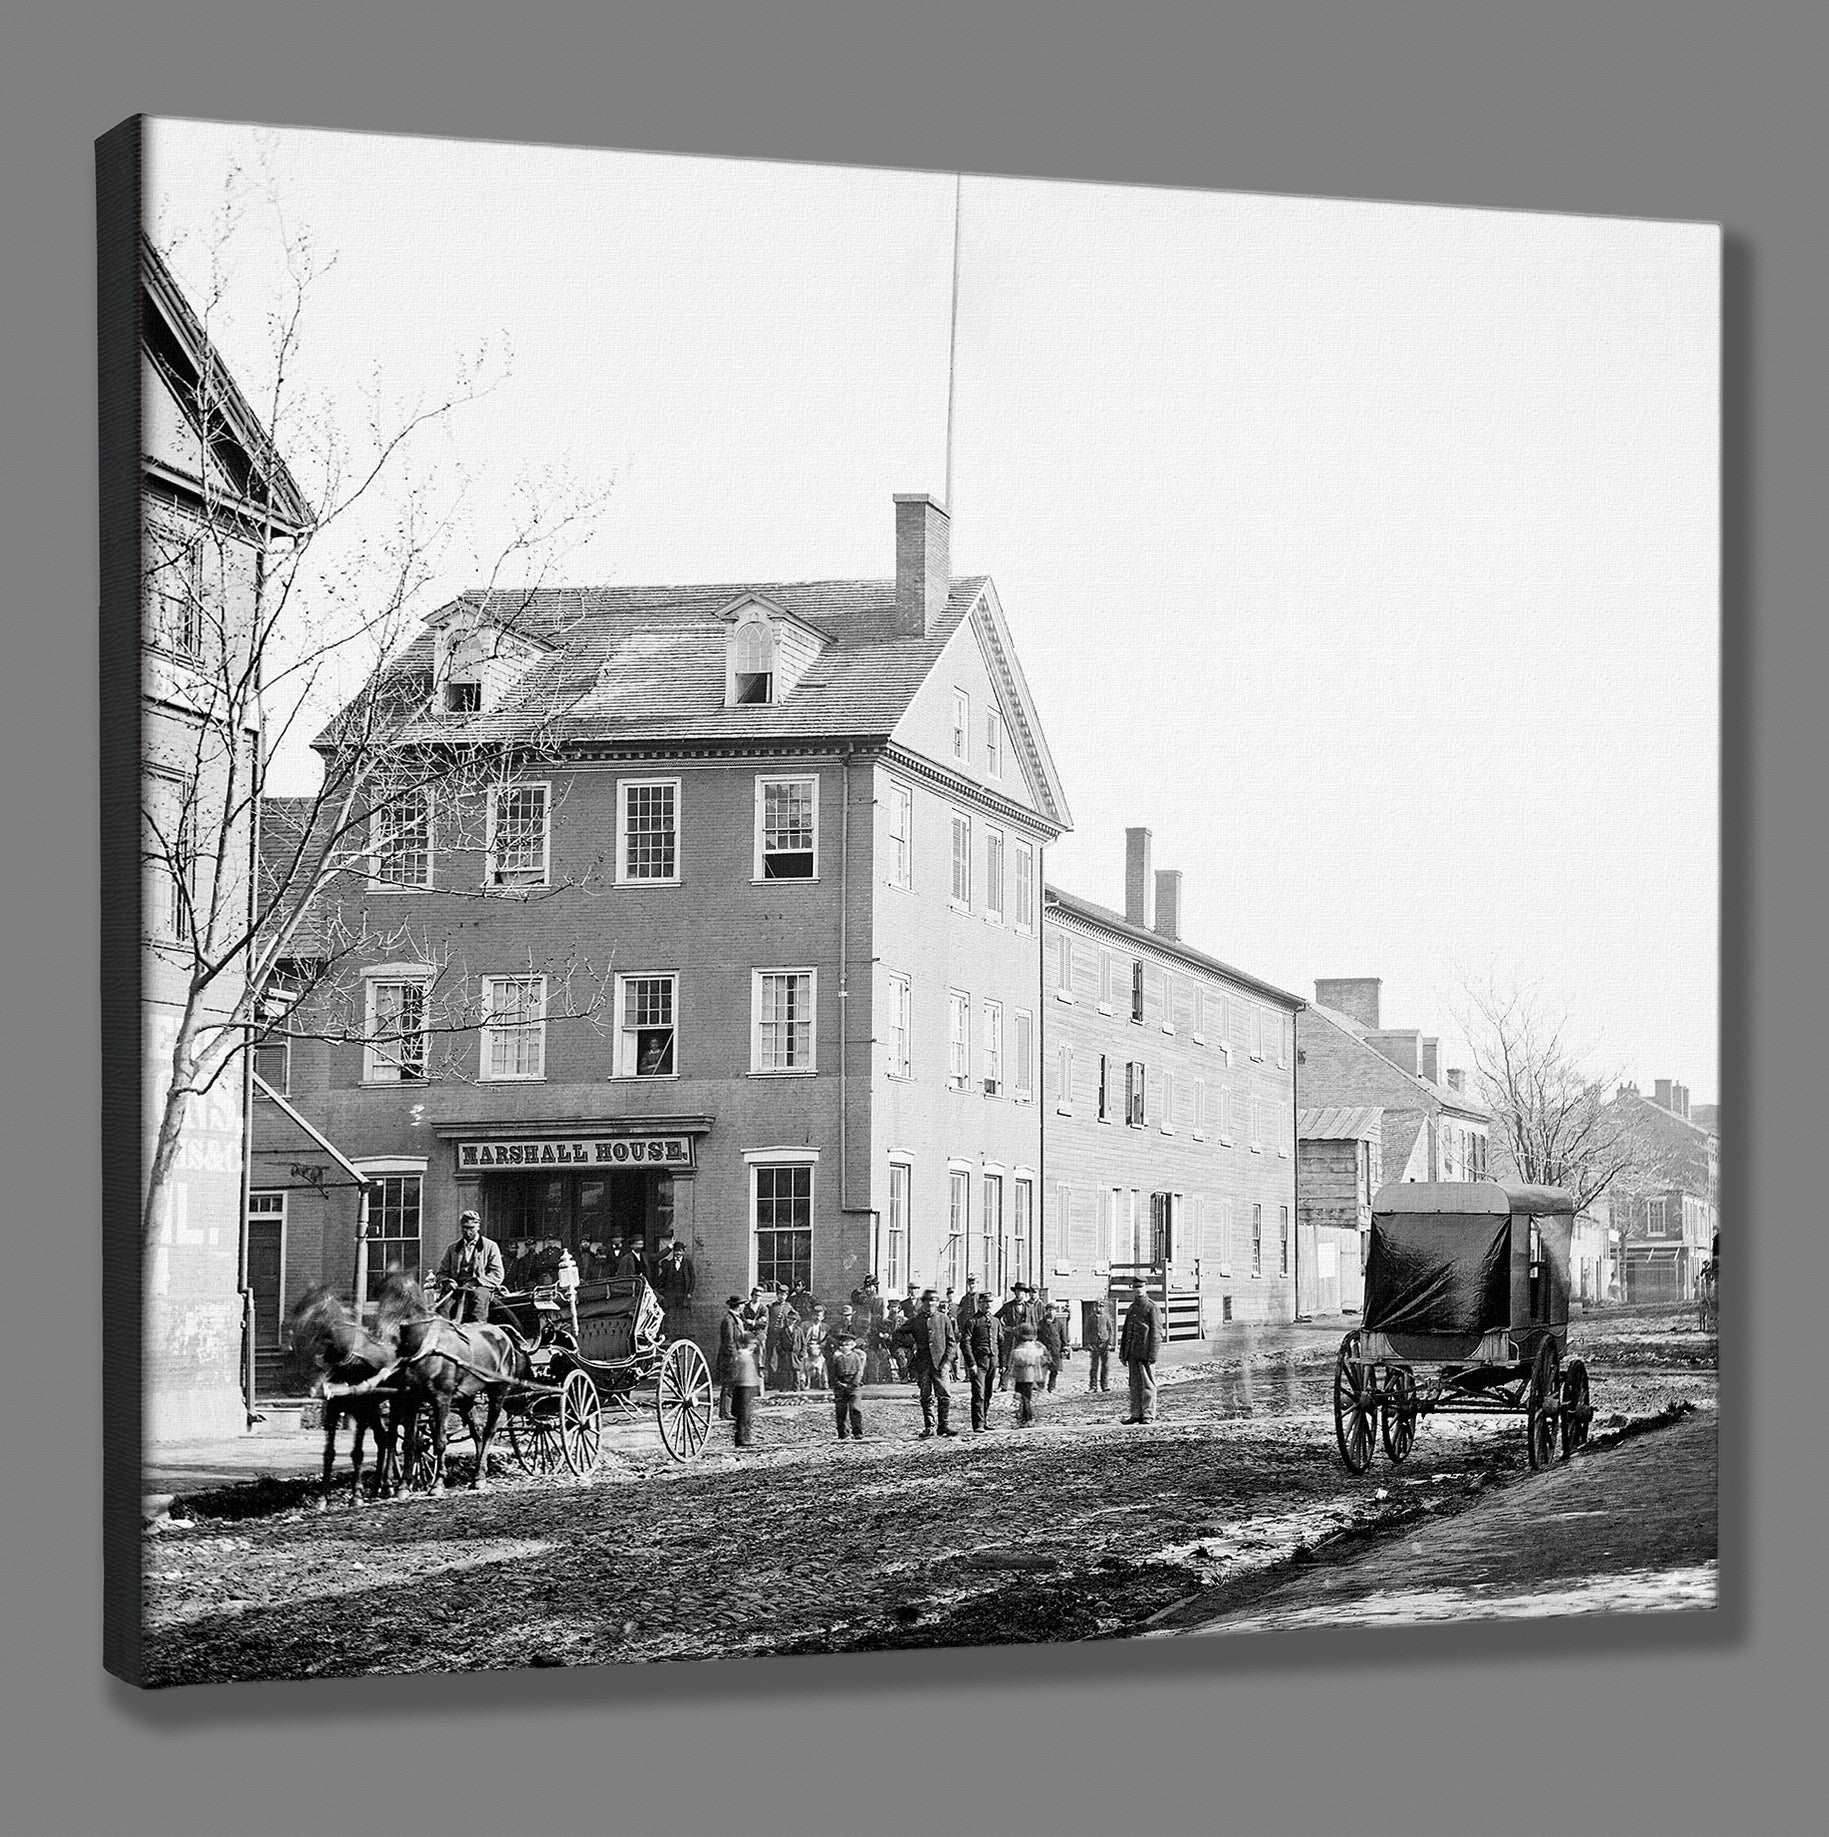 A mockup canvas print of a vintage photograph of the Marshall House in Alexandria